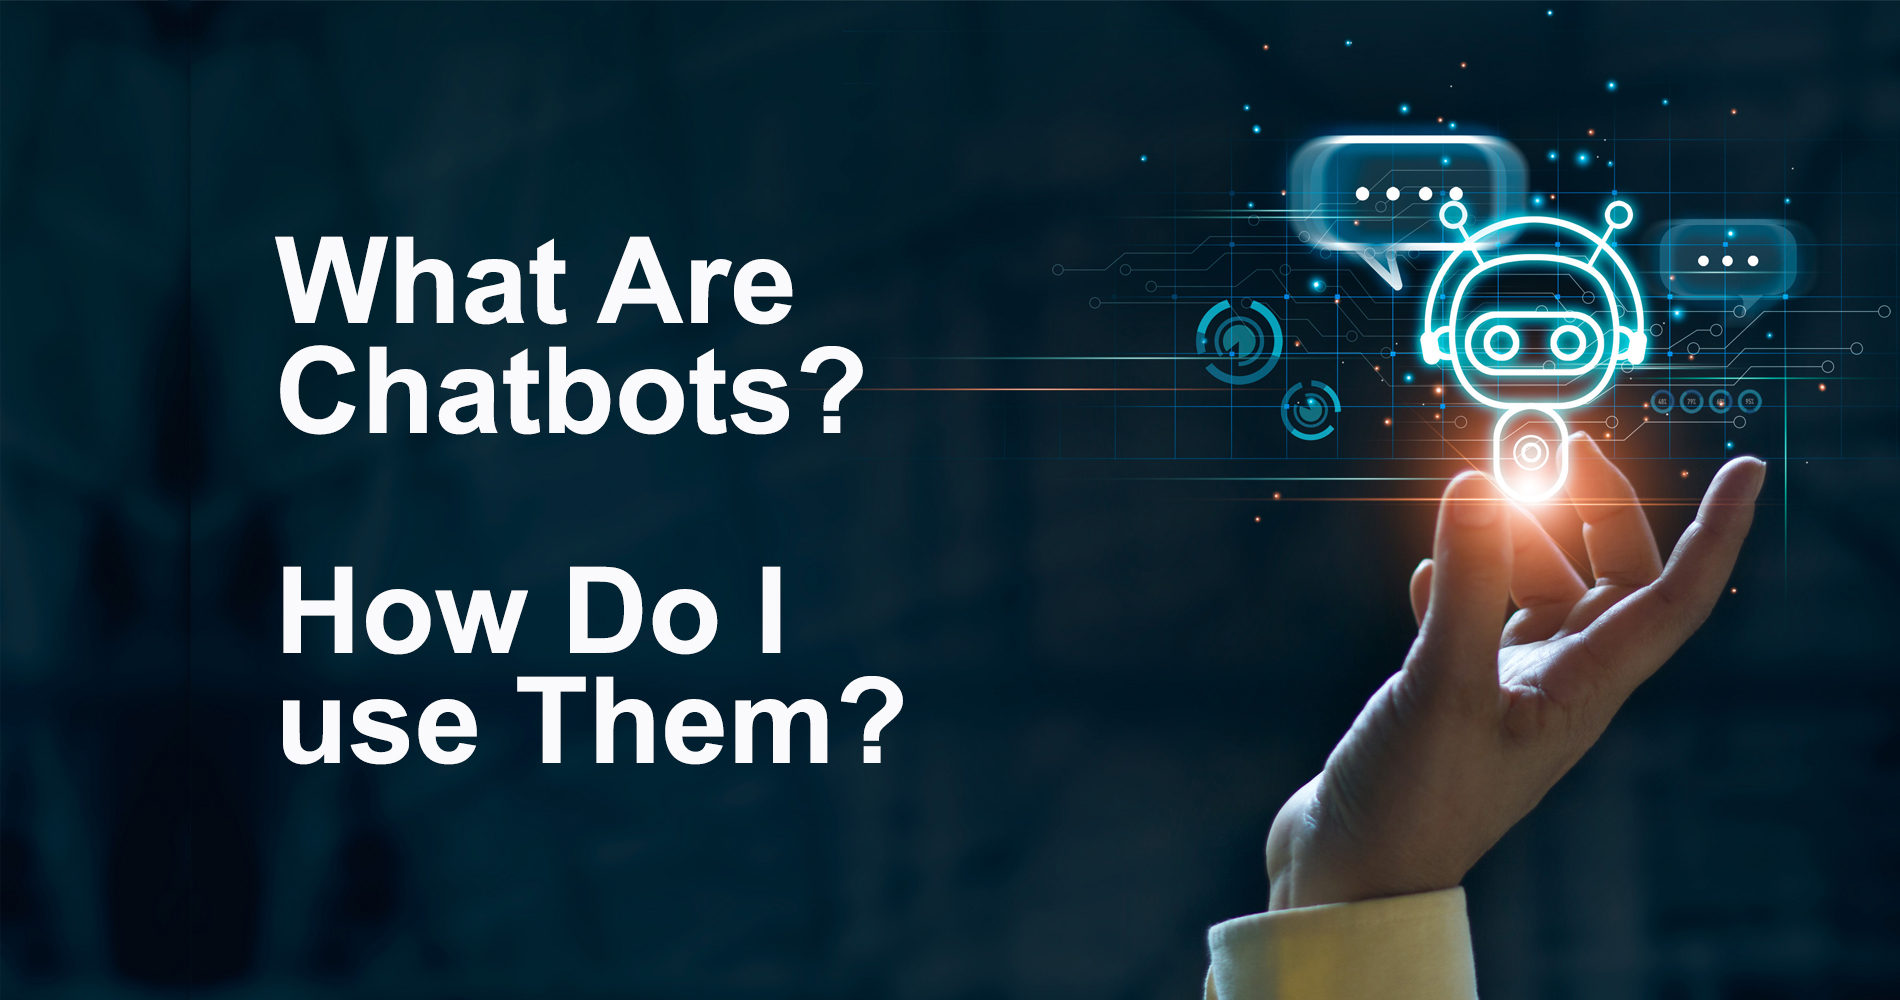 What Are Chatbots? How Do I use Them?